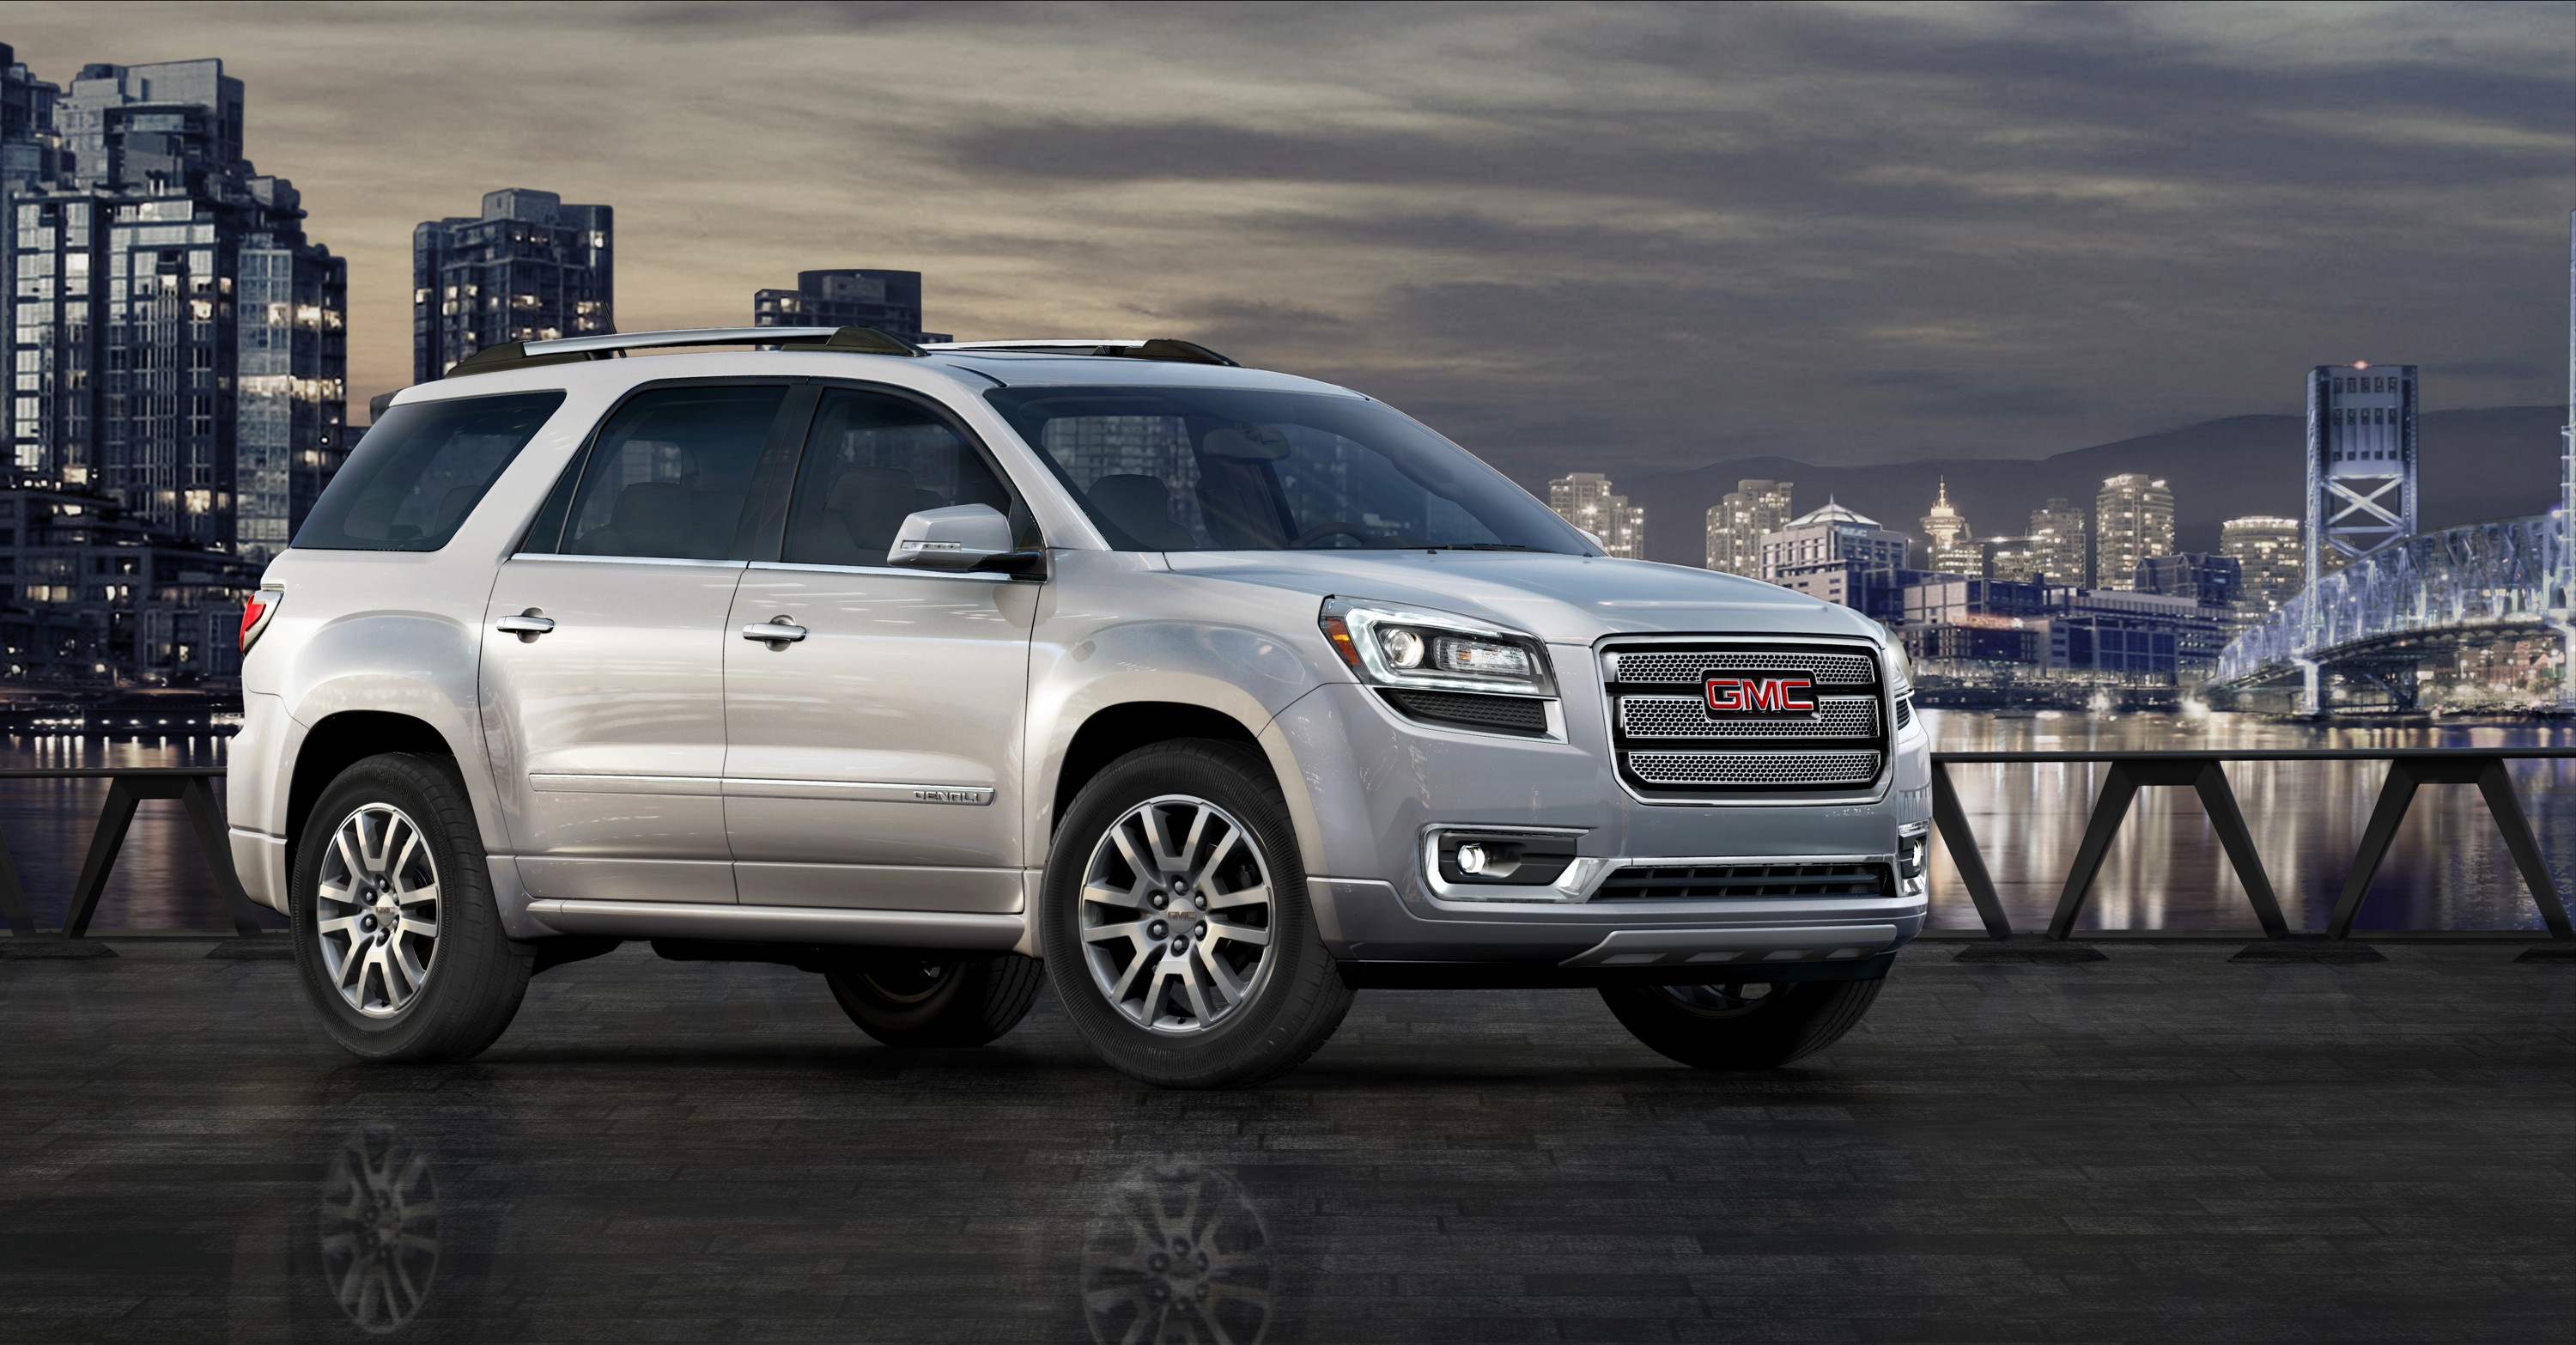 2016 Gmc Acadia Introduced With Onstar 4g Lte